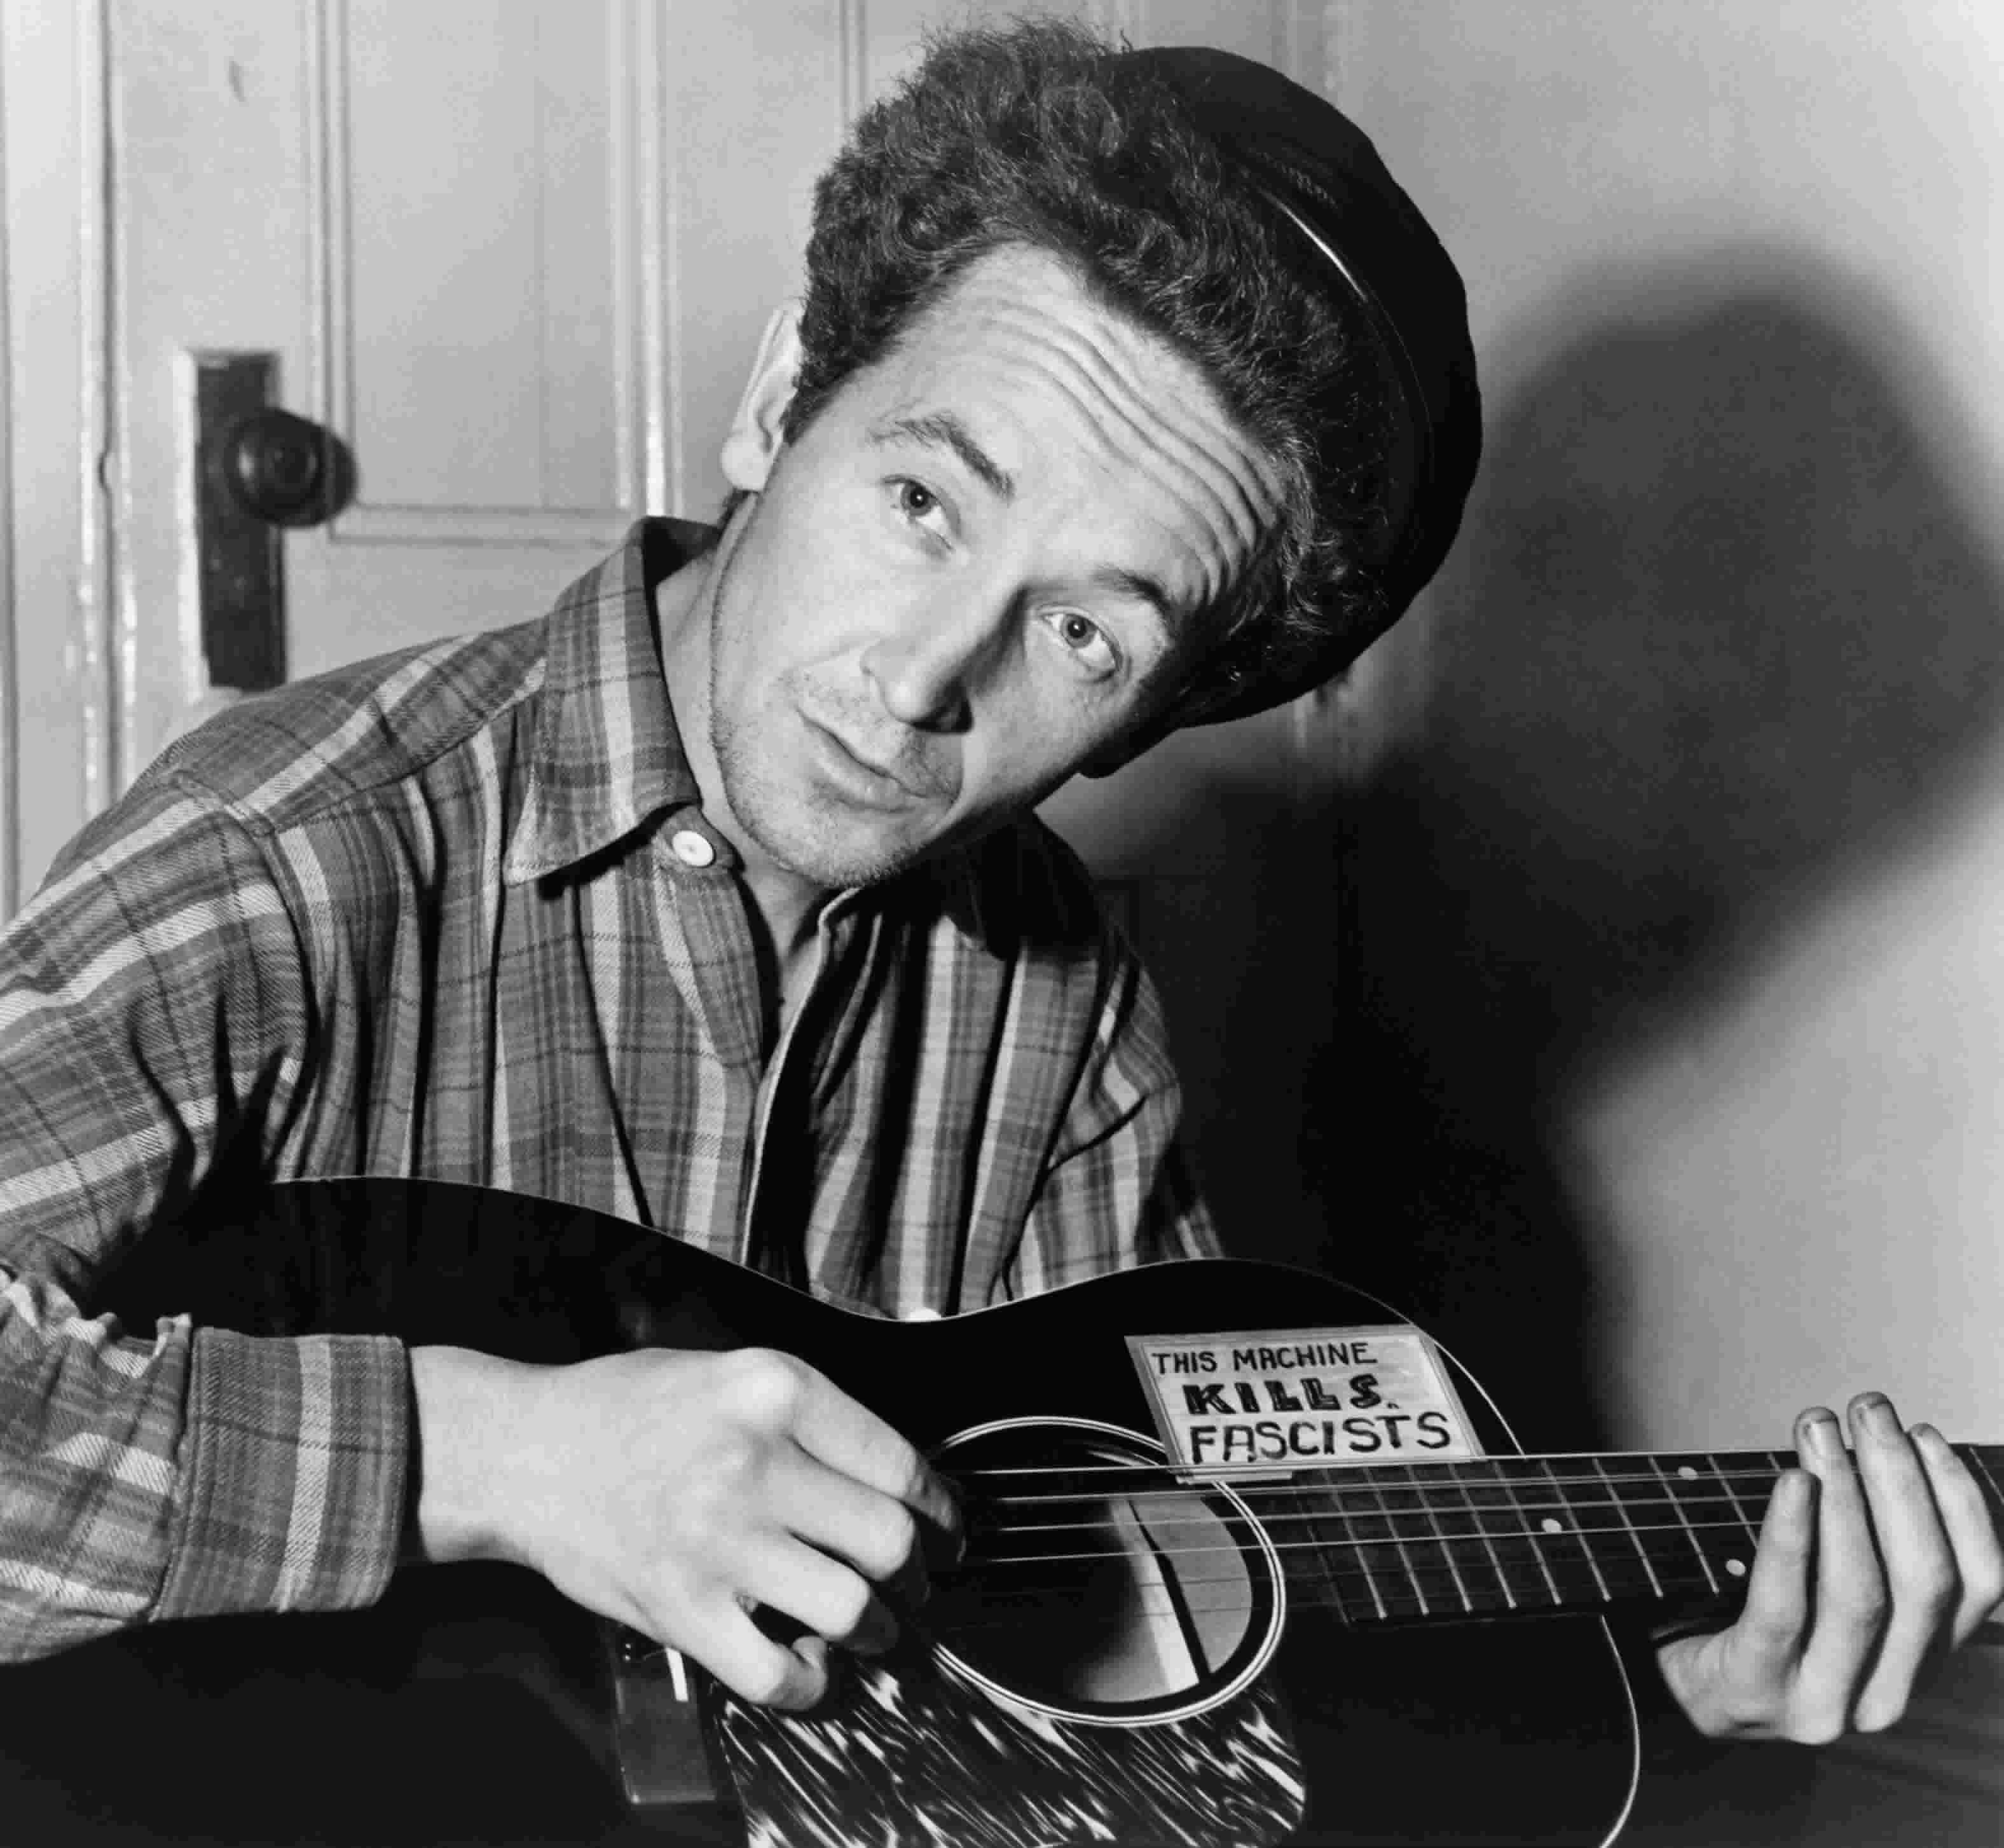 Complete Woody Guthrie Songbook 225 Songs With Lyrics Chords And Pdf For Printing Start Page And Titles List